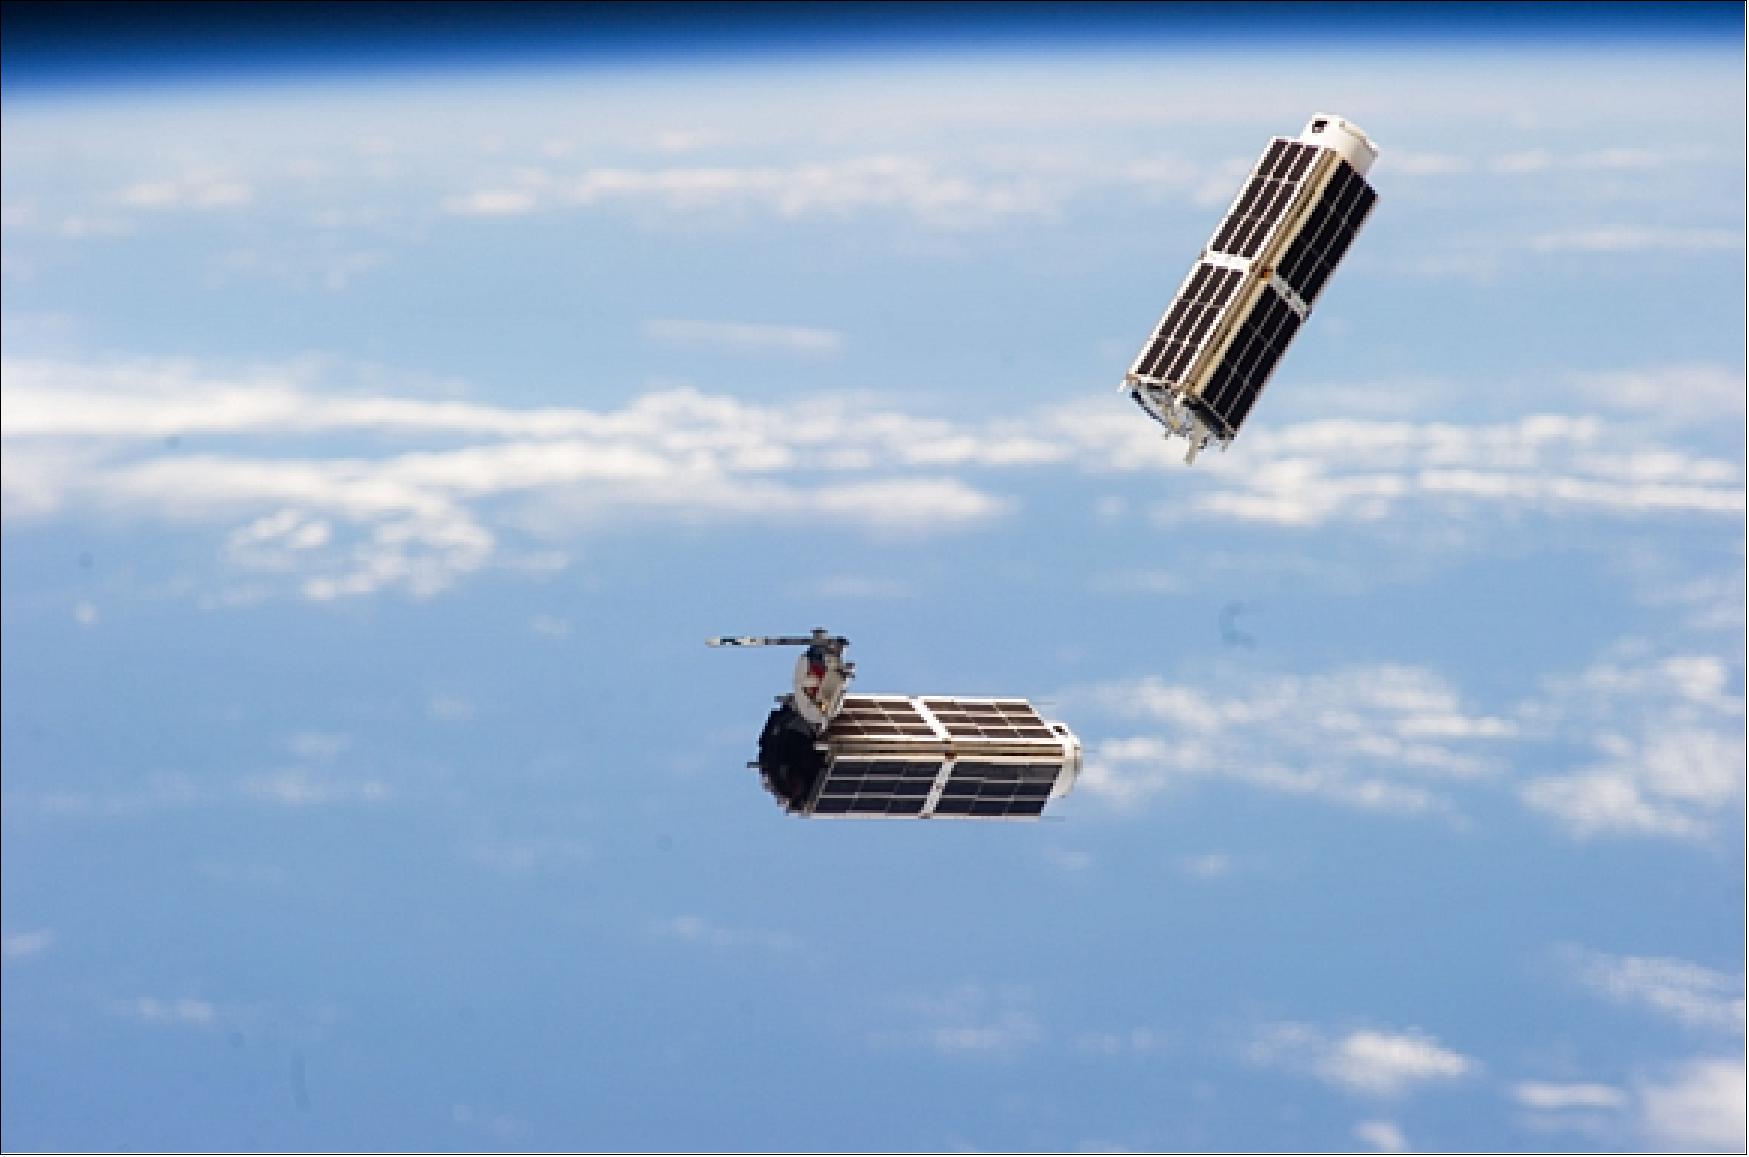 Figure 52: Deployment of the first two Flock 1 nanosatellites from the NanoRacks deployer system of the ISS (image credit: NASA, Universe Today)